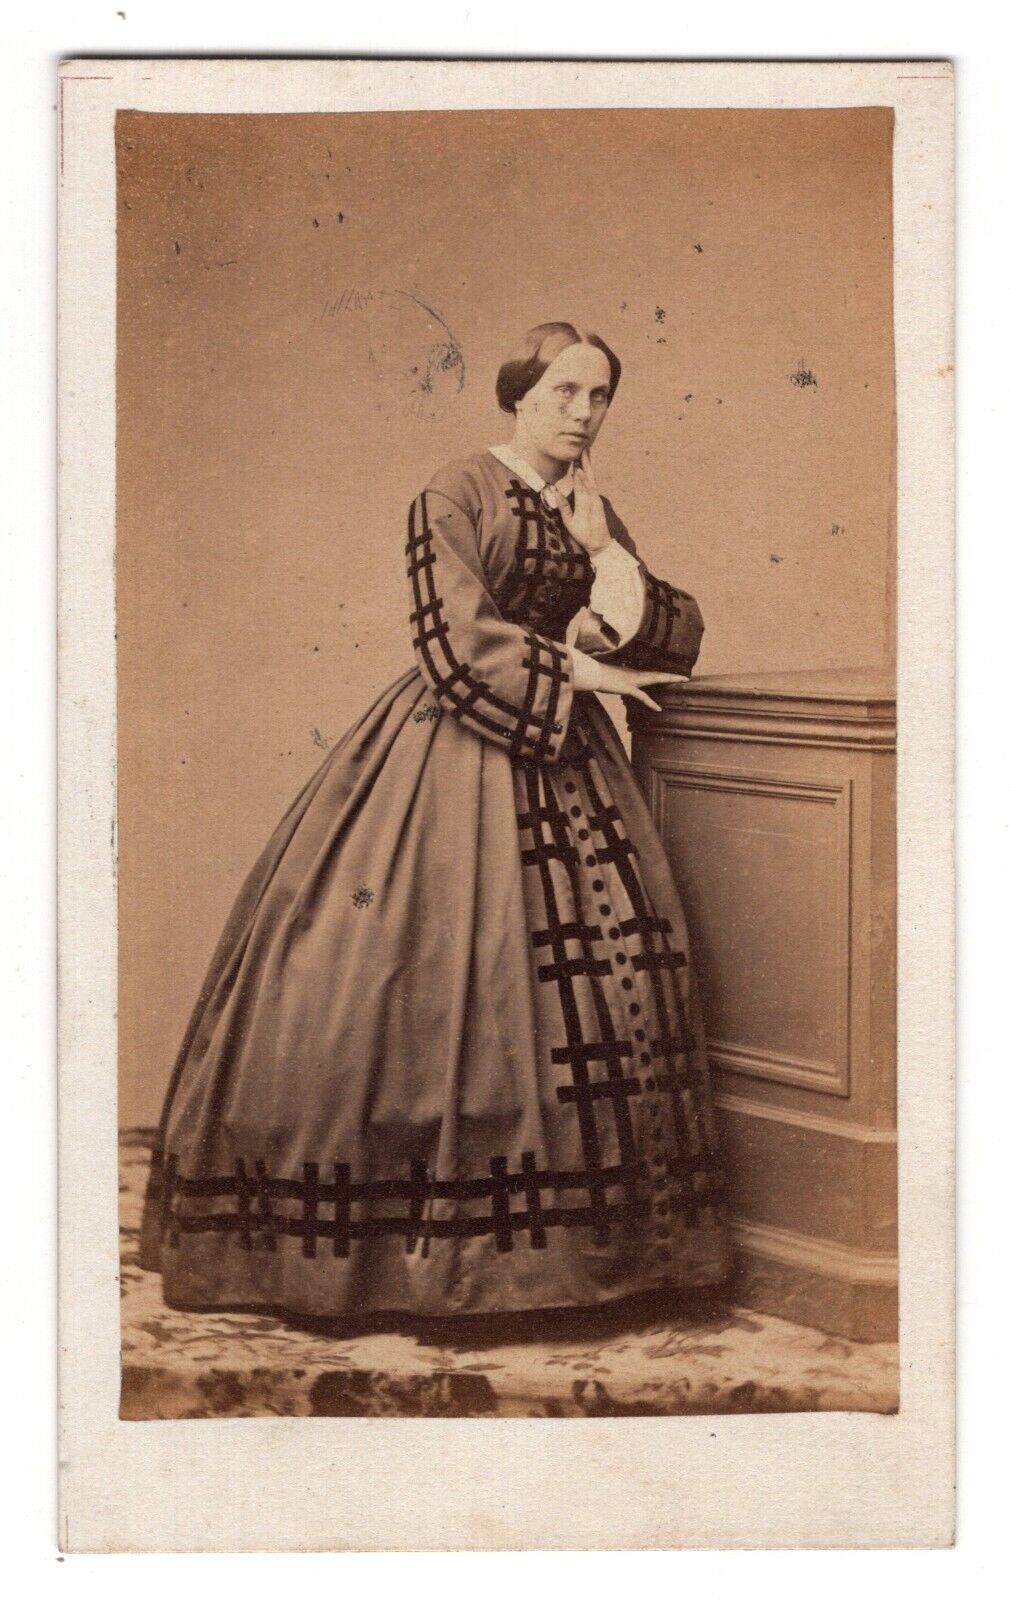 CIRCA 1860s CDV CARETTE YOUNG LADY IN FANCY DRESS LILLE FRANCE